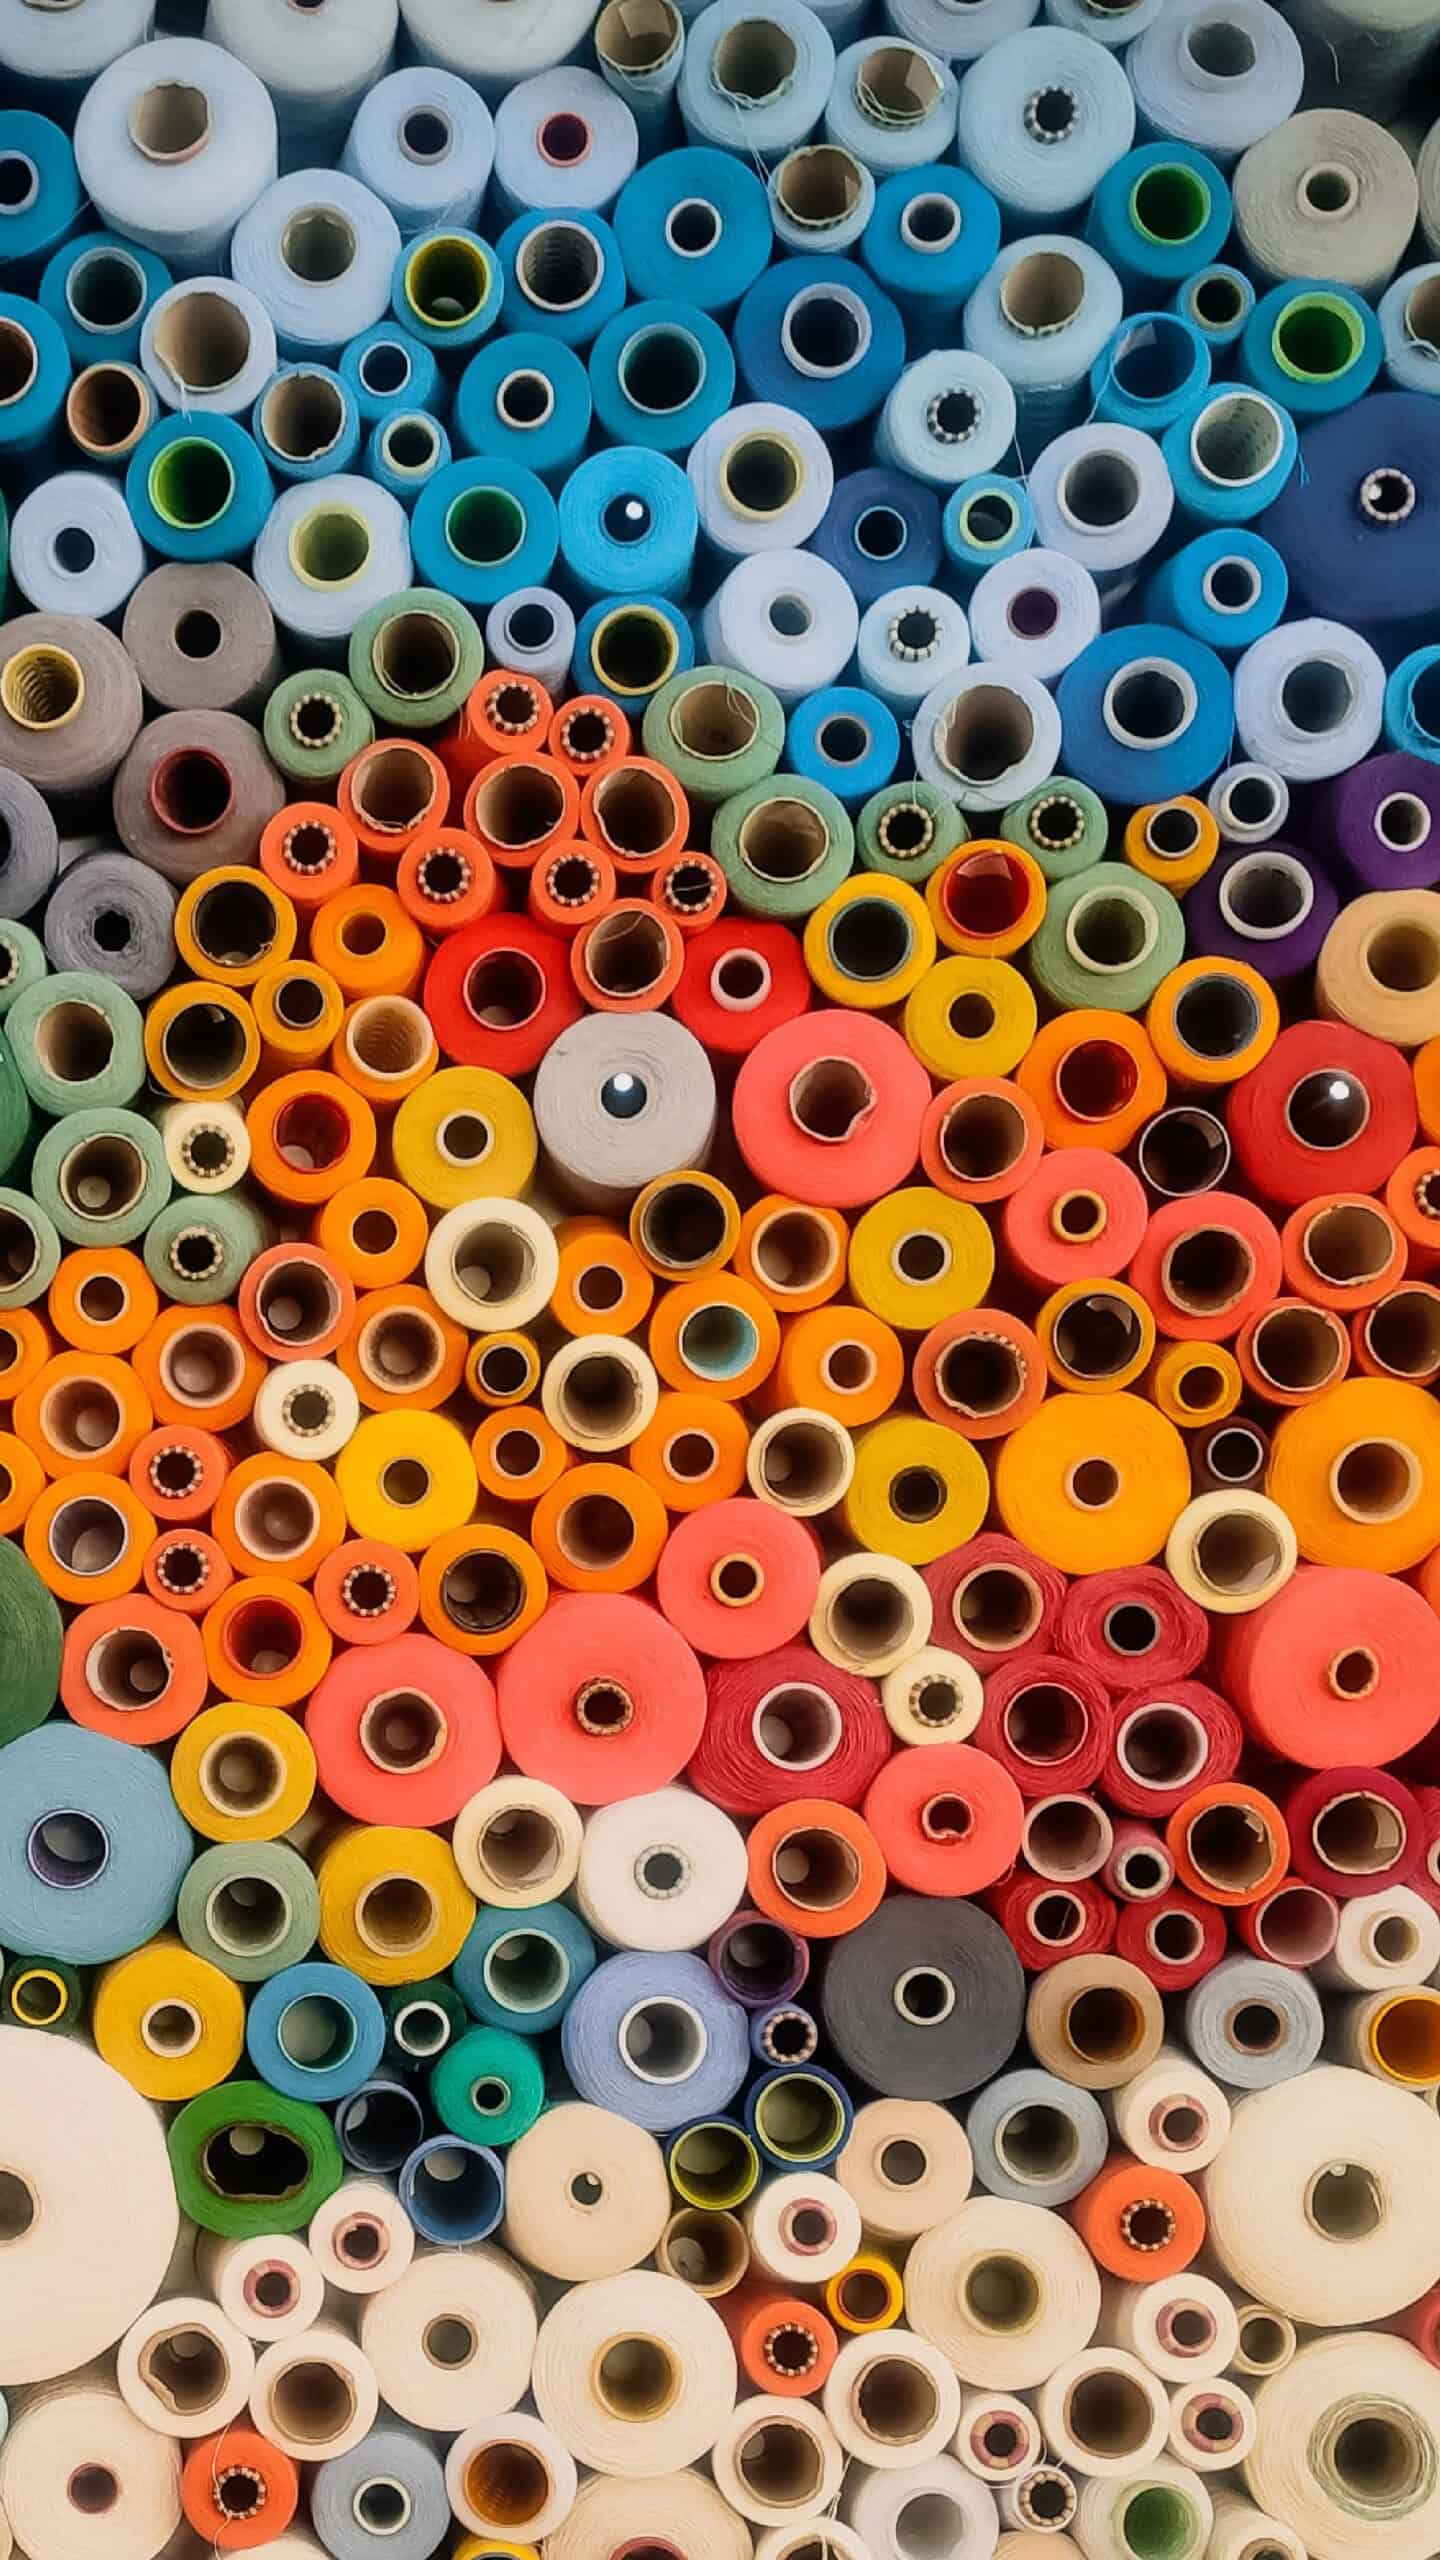 colorful rolls of fabric stacked on a shelf November 2022 wallpapers – FREE calendars in Sunday & Monday starts + no-calendar designs. 59 beautiful options for desktop & smart phones!